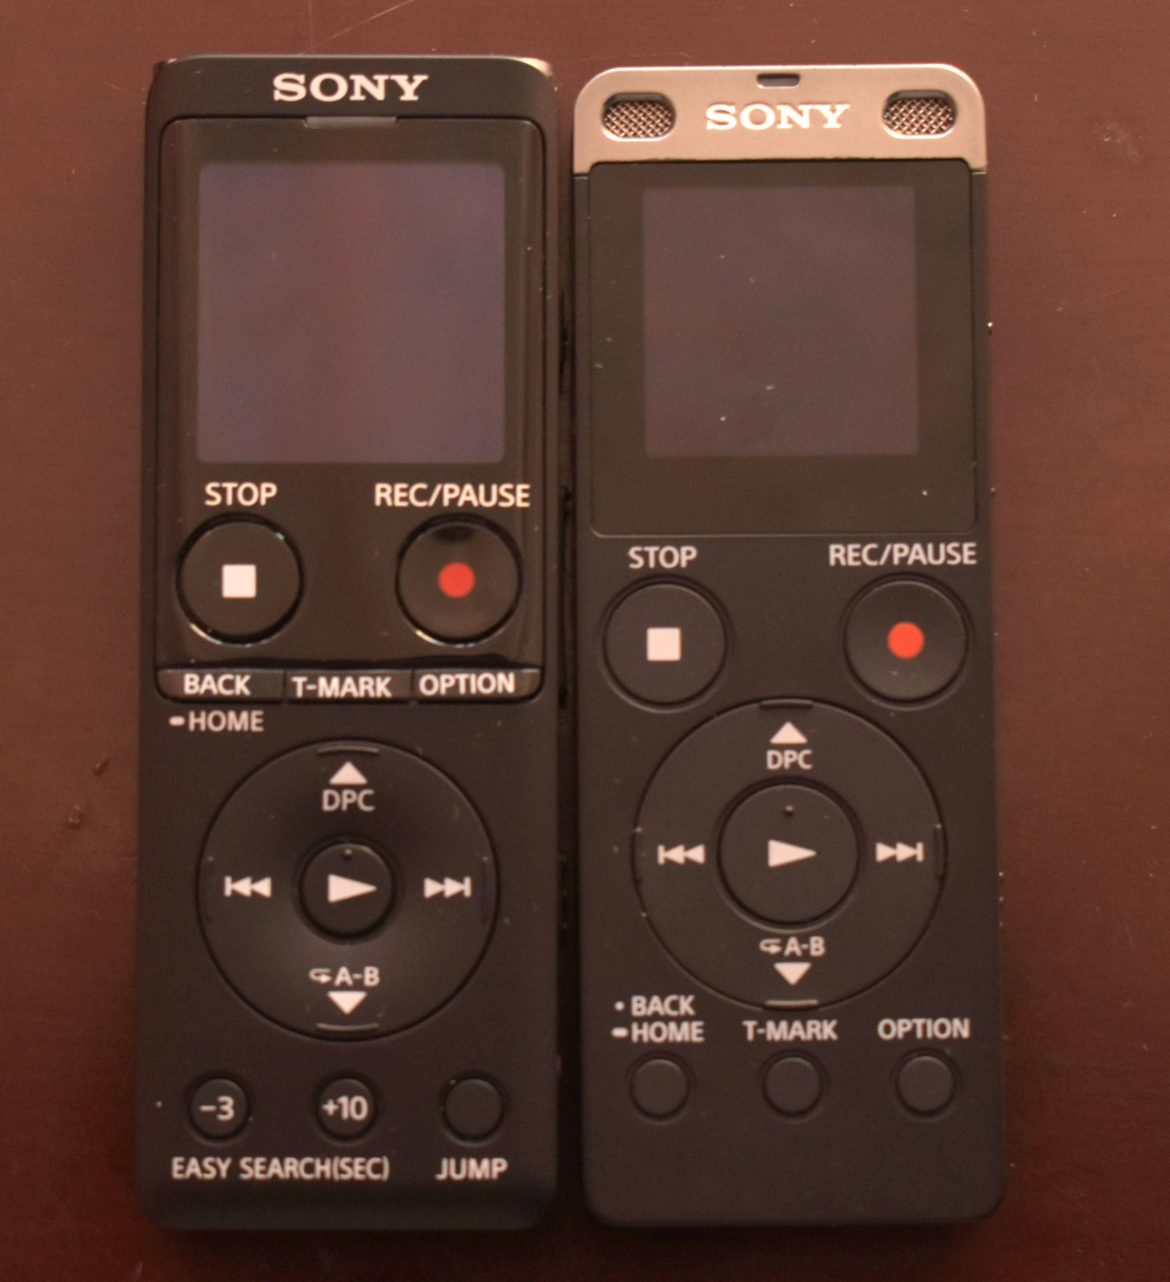 Sony ICD-ux570 compared to Sony ICD-ux560